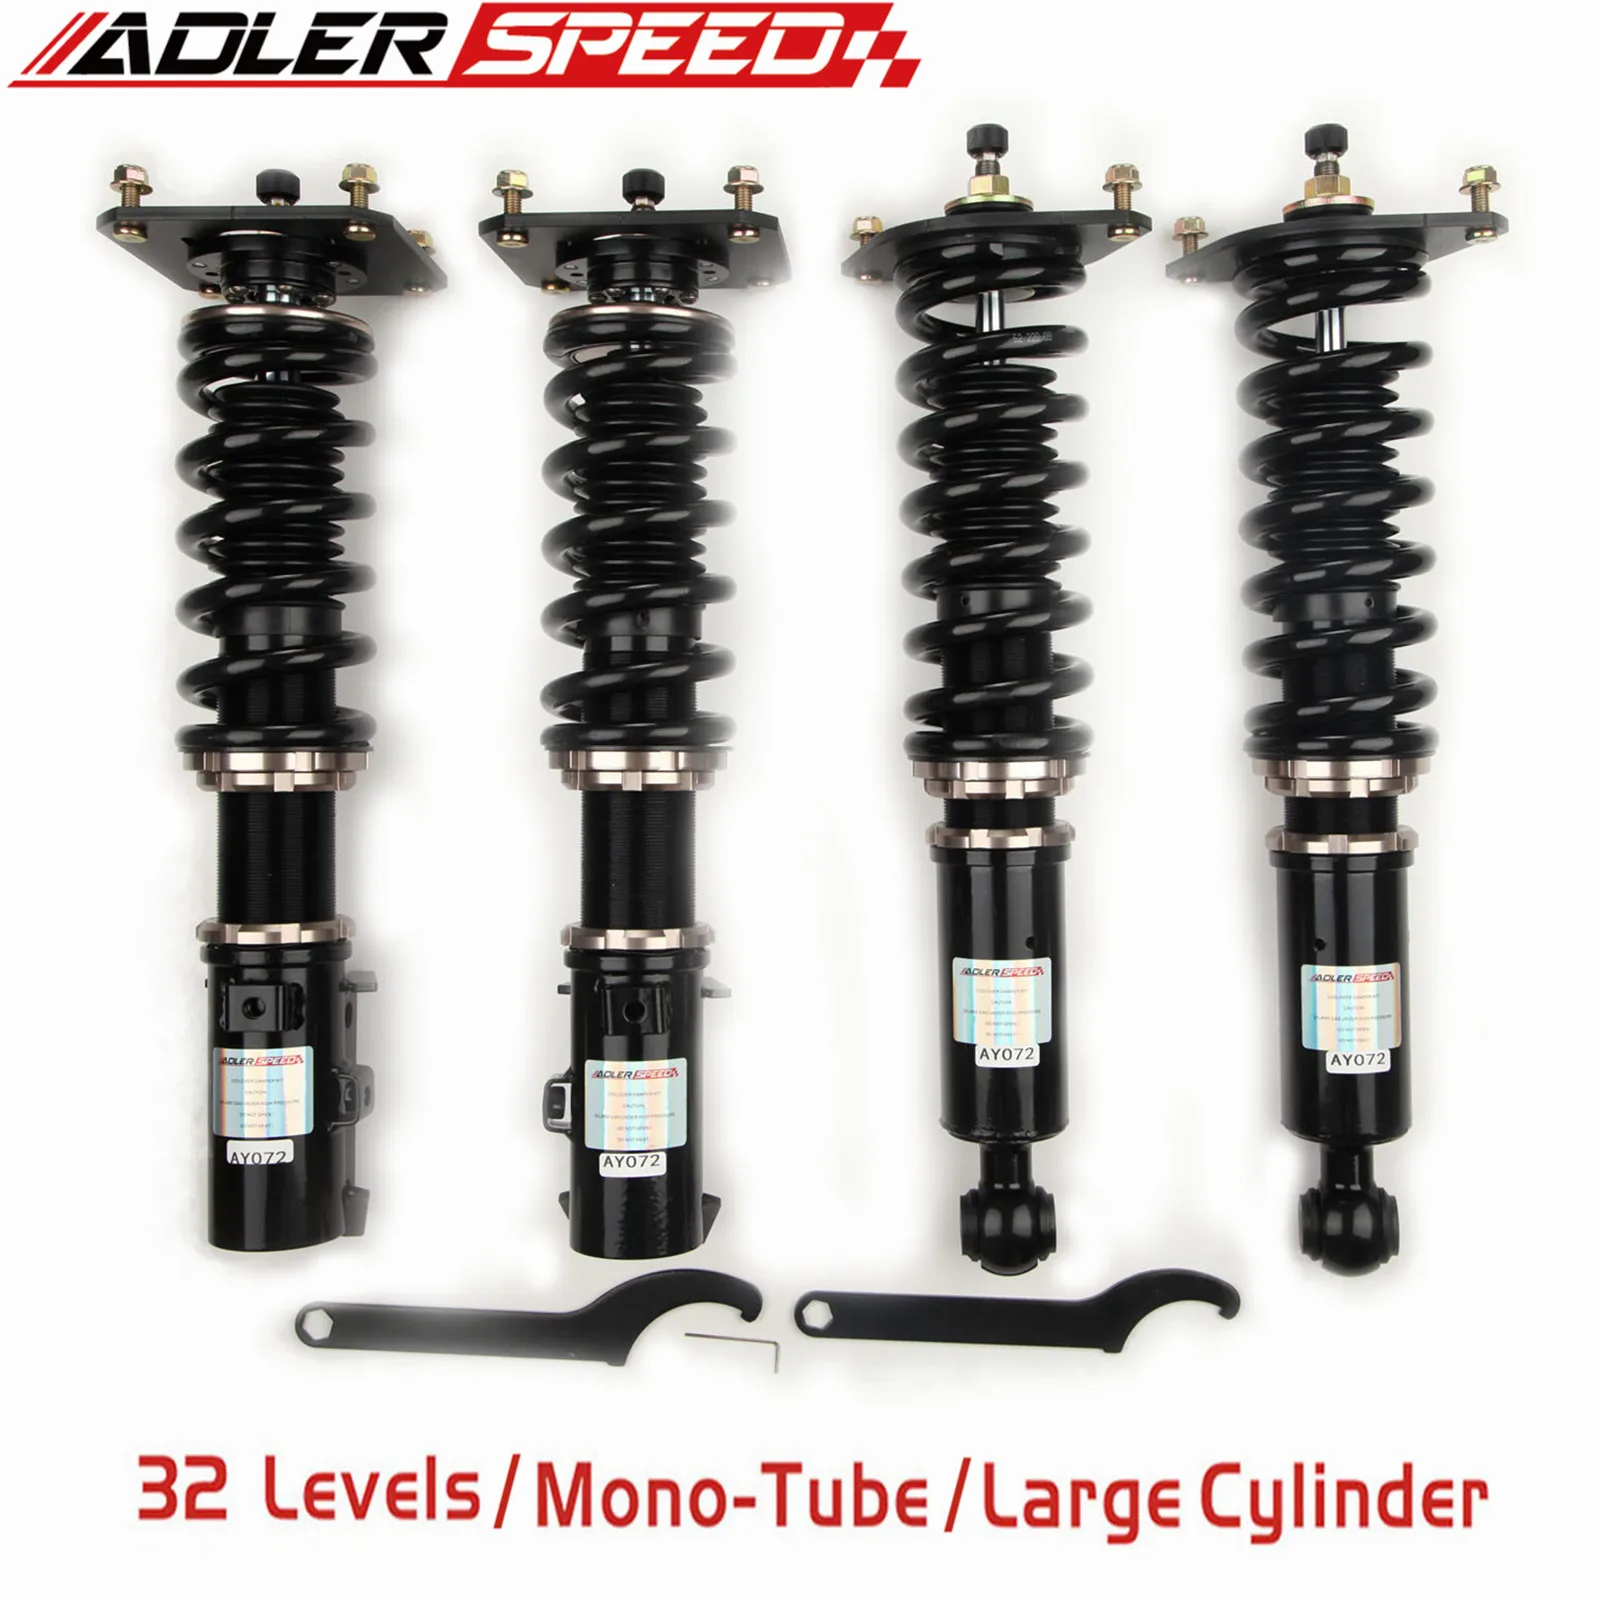 

Adlerspeed 32 Way Mono Tube Coilovers Lowering Suspension Kit For 86-91 Mazda RX-7 FC3s FC